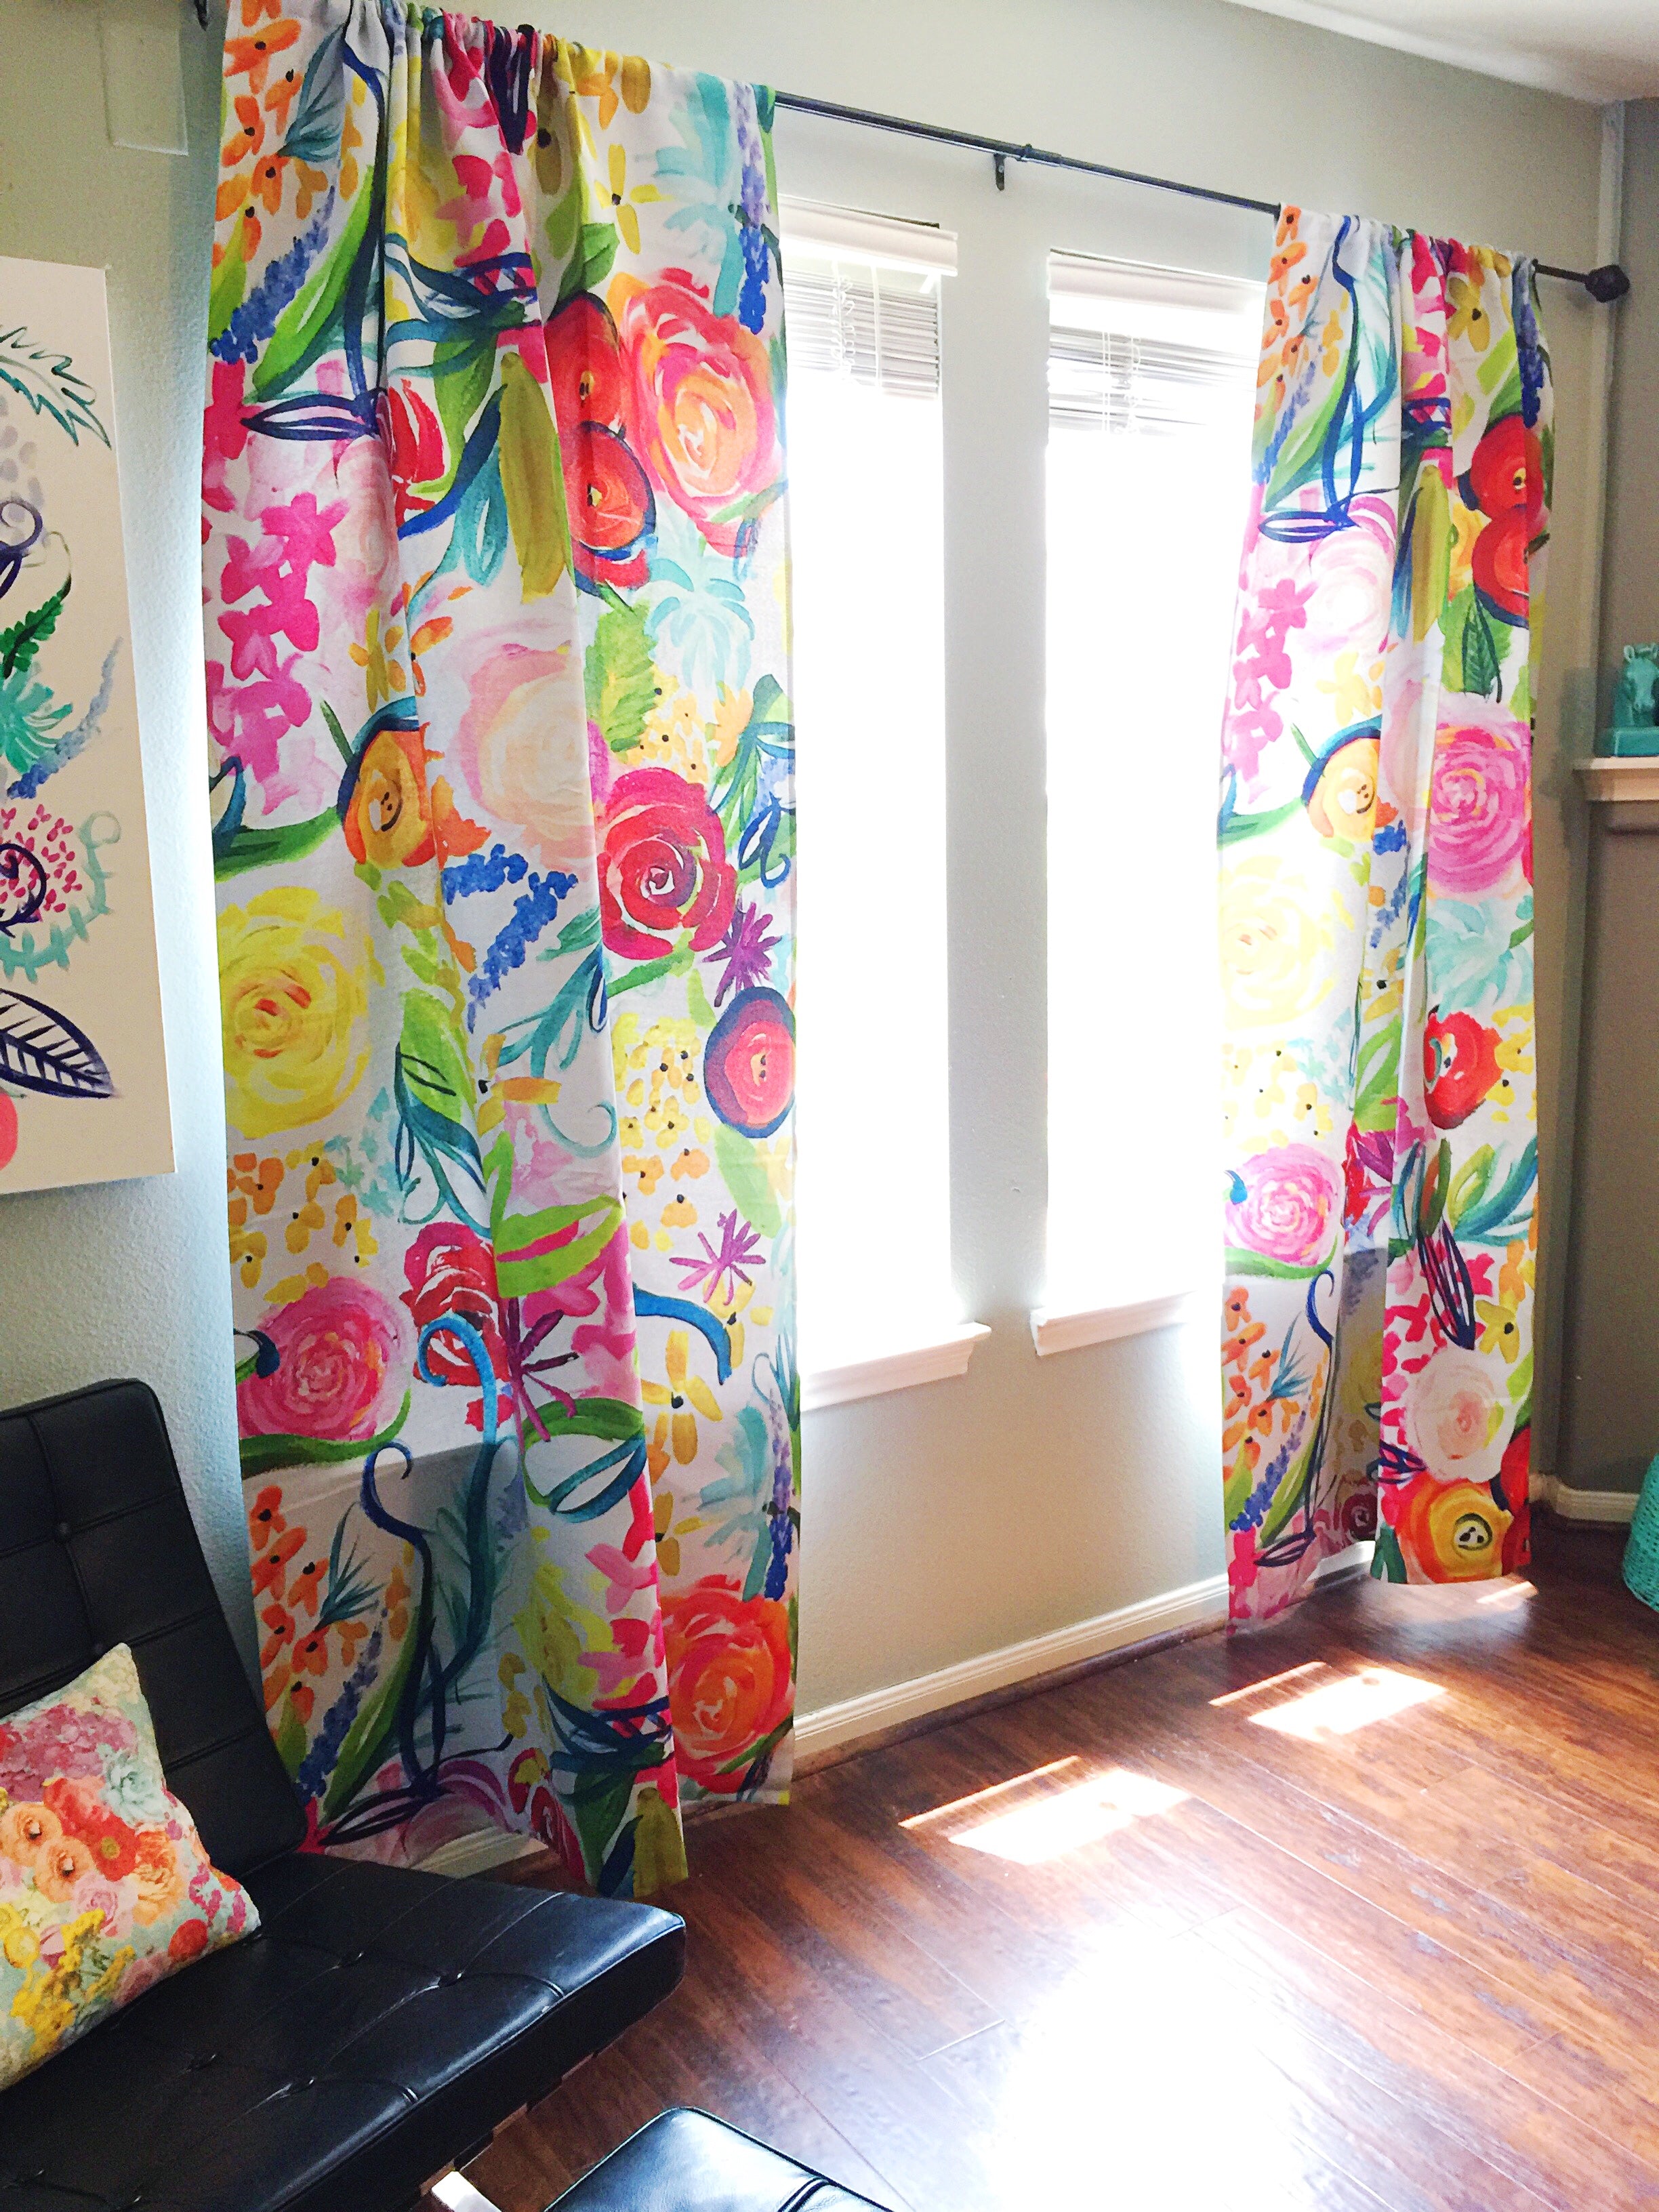 Colorful 'Neon Summer Floral' Painting Print Art Curtains. – The Artwerks